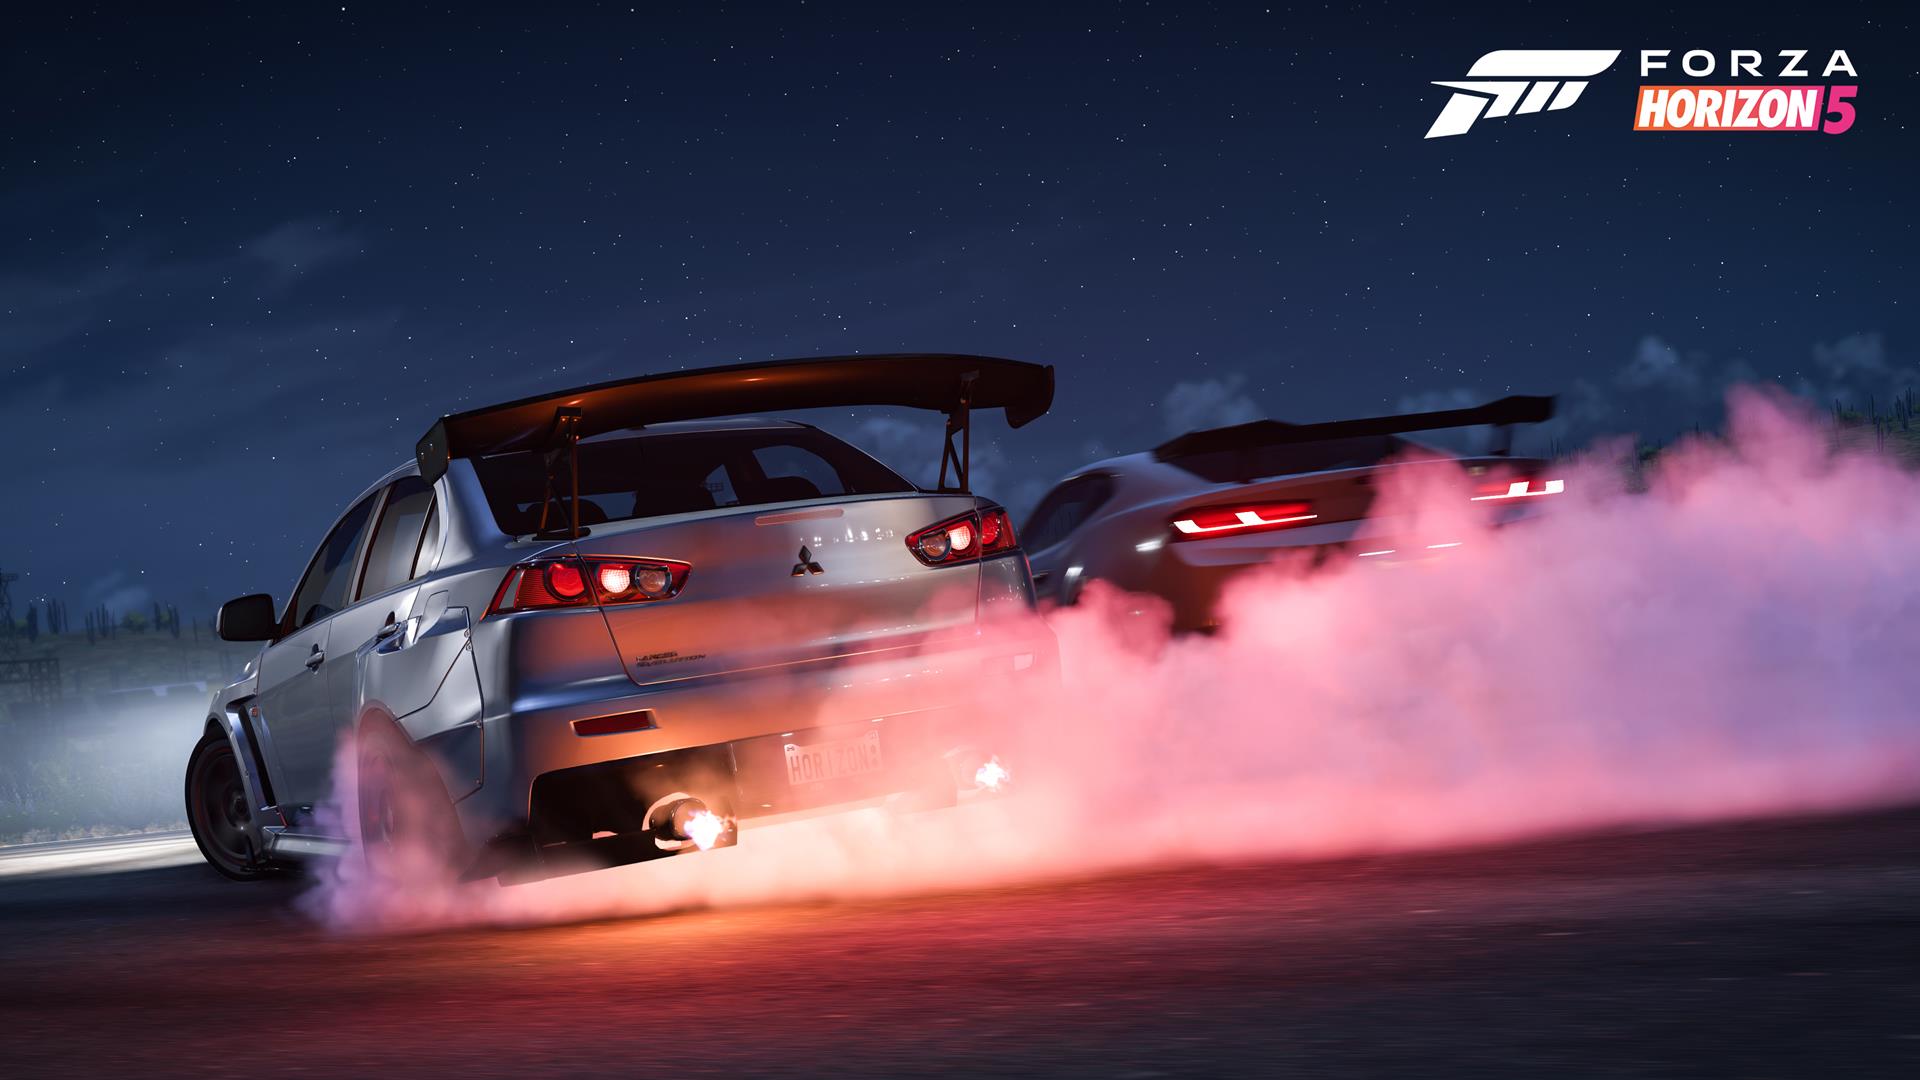 Image for Here's an early look at some Forza Horizon 5 gameplay footage